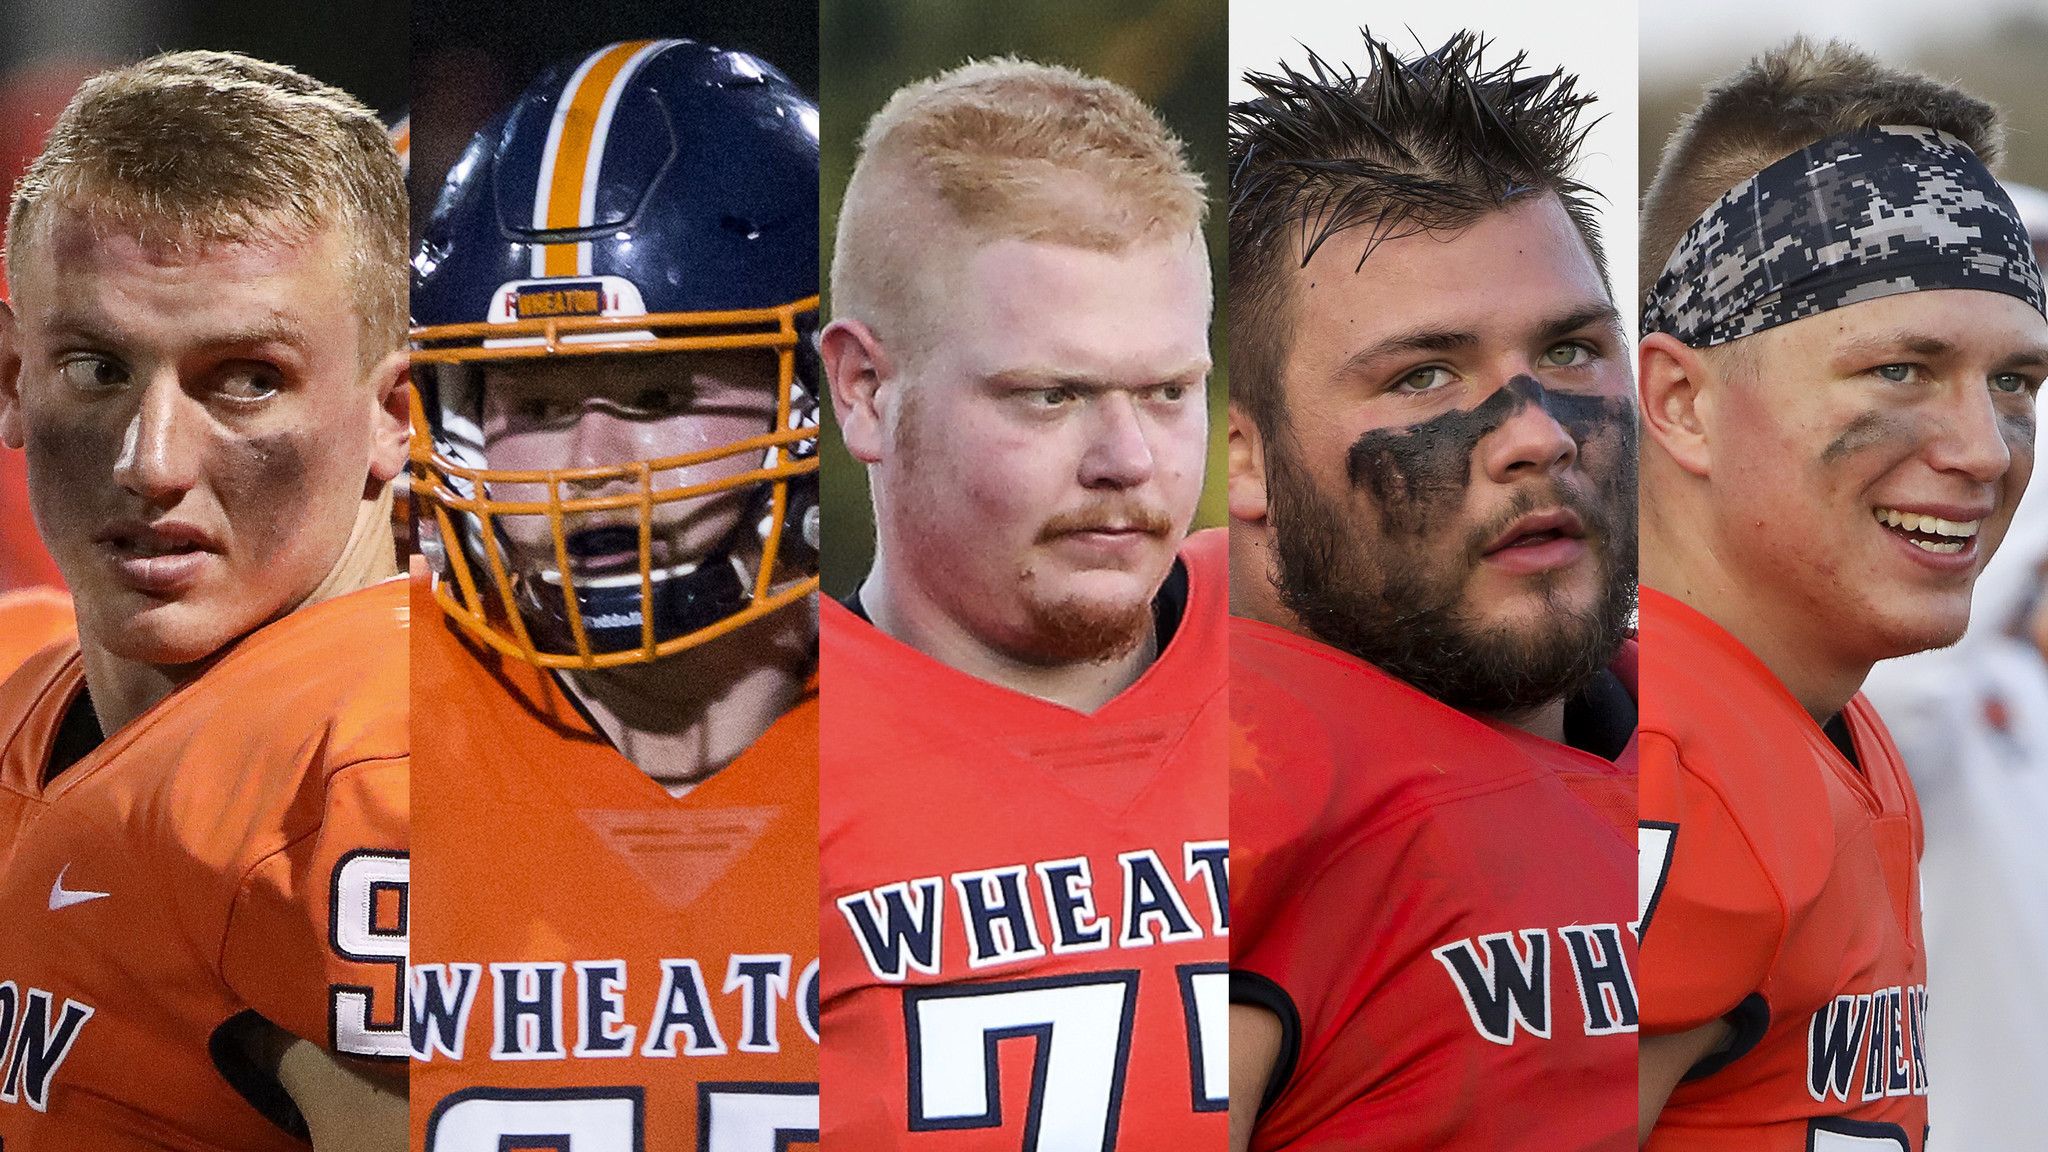 In hazing case, Wheaton College players suspended from 